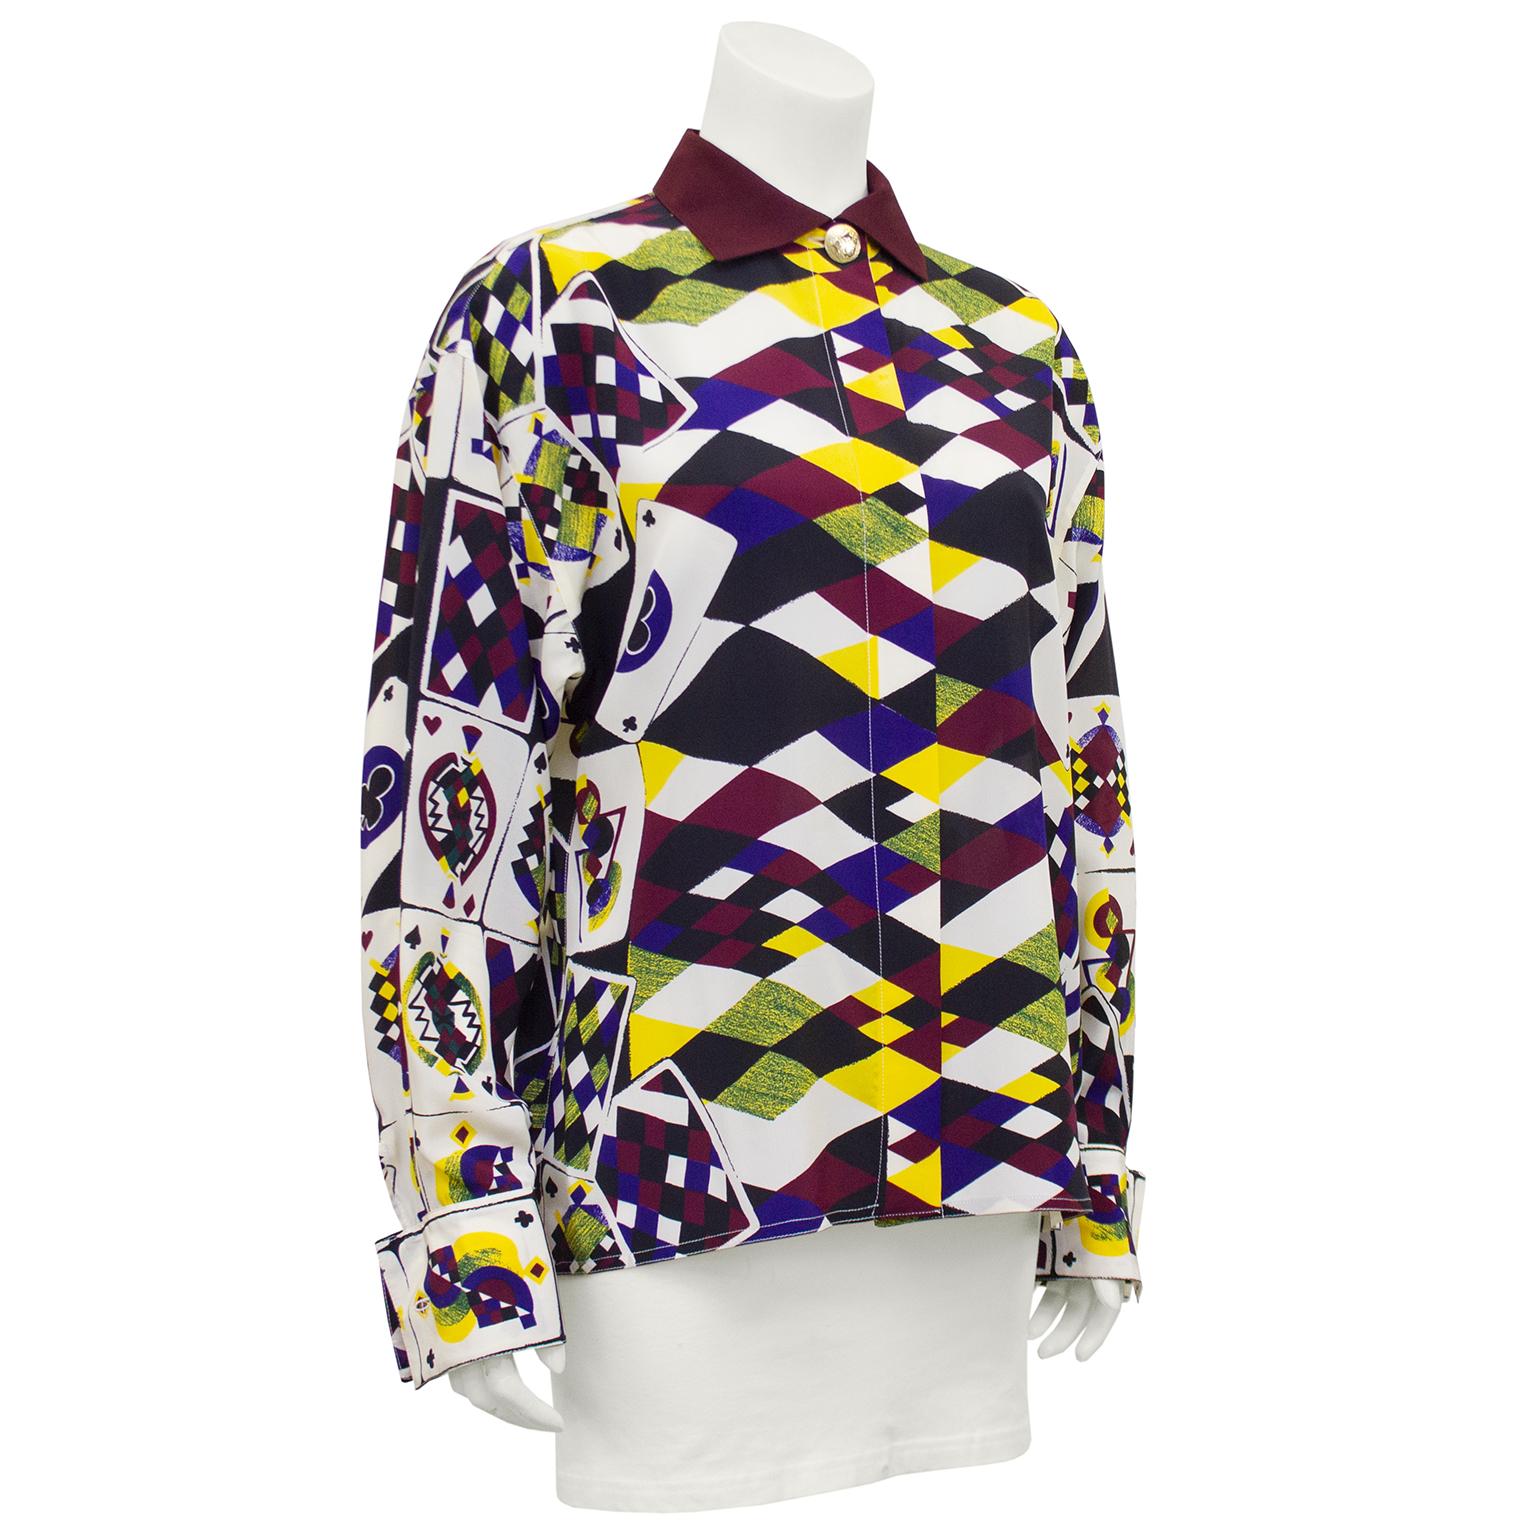 Gianni Versace white label silk shirt from the early 1990s. All over print of abstract playing cards in white, maroon, black, yellow and navy. Solid maroon collar and contrasting gold tone metal button featuring a diamond, a spade and a club. French